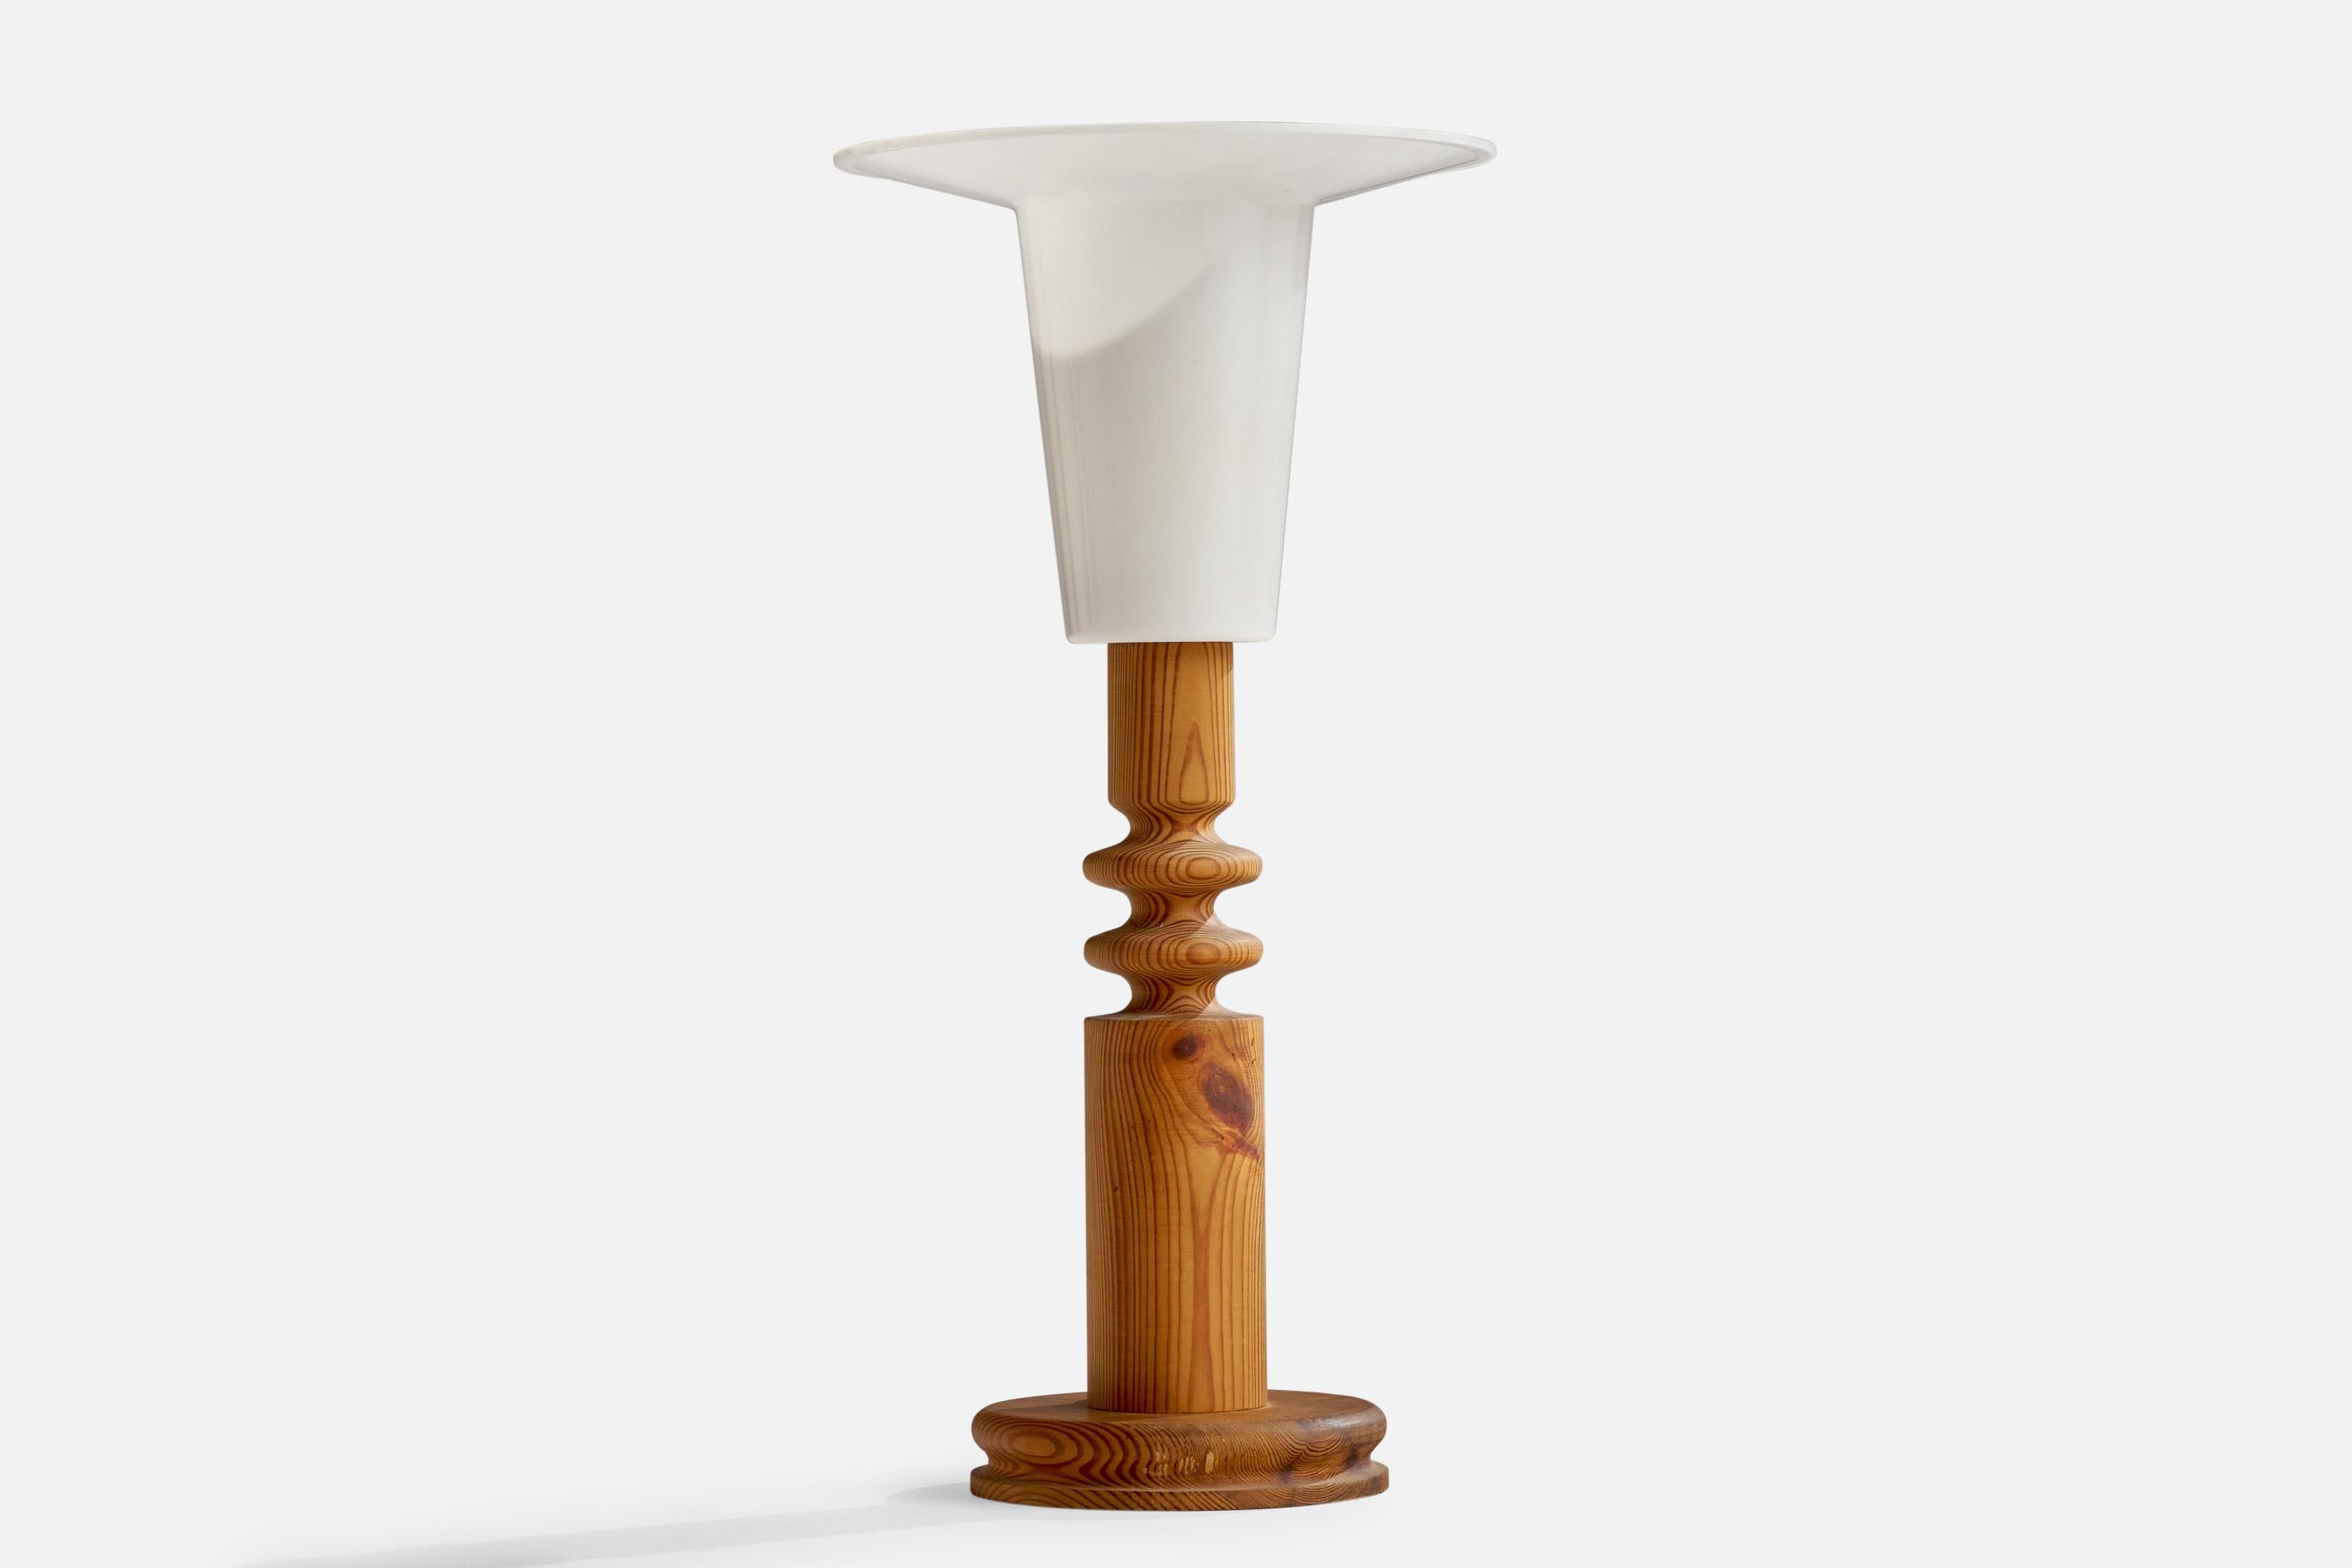 A pine and acrylic table lamp designed by Uno and Östen Kristiansson and produced by Luxus, Vittsjö, Sweden, 1970s.

Overall Dimensions (inches): 25.25” H x 12.50” W x 7.75” D
Stated dimensions include shade.
Bulb Specifications: E-26 Bulb
Number of